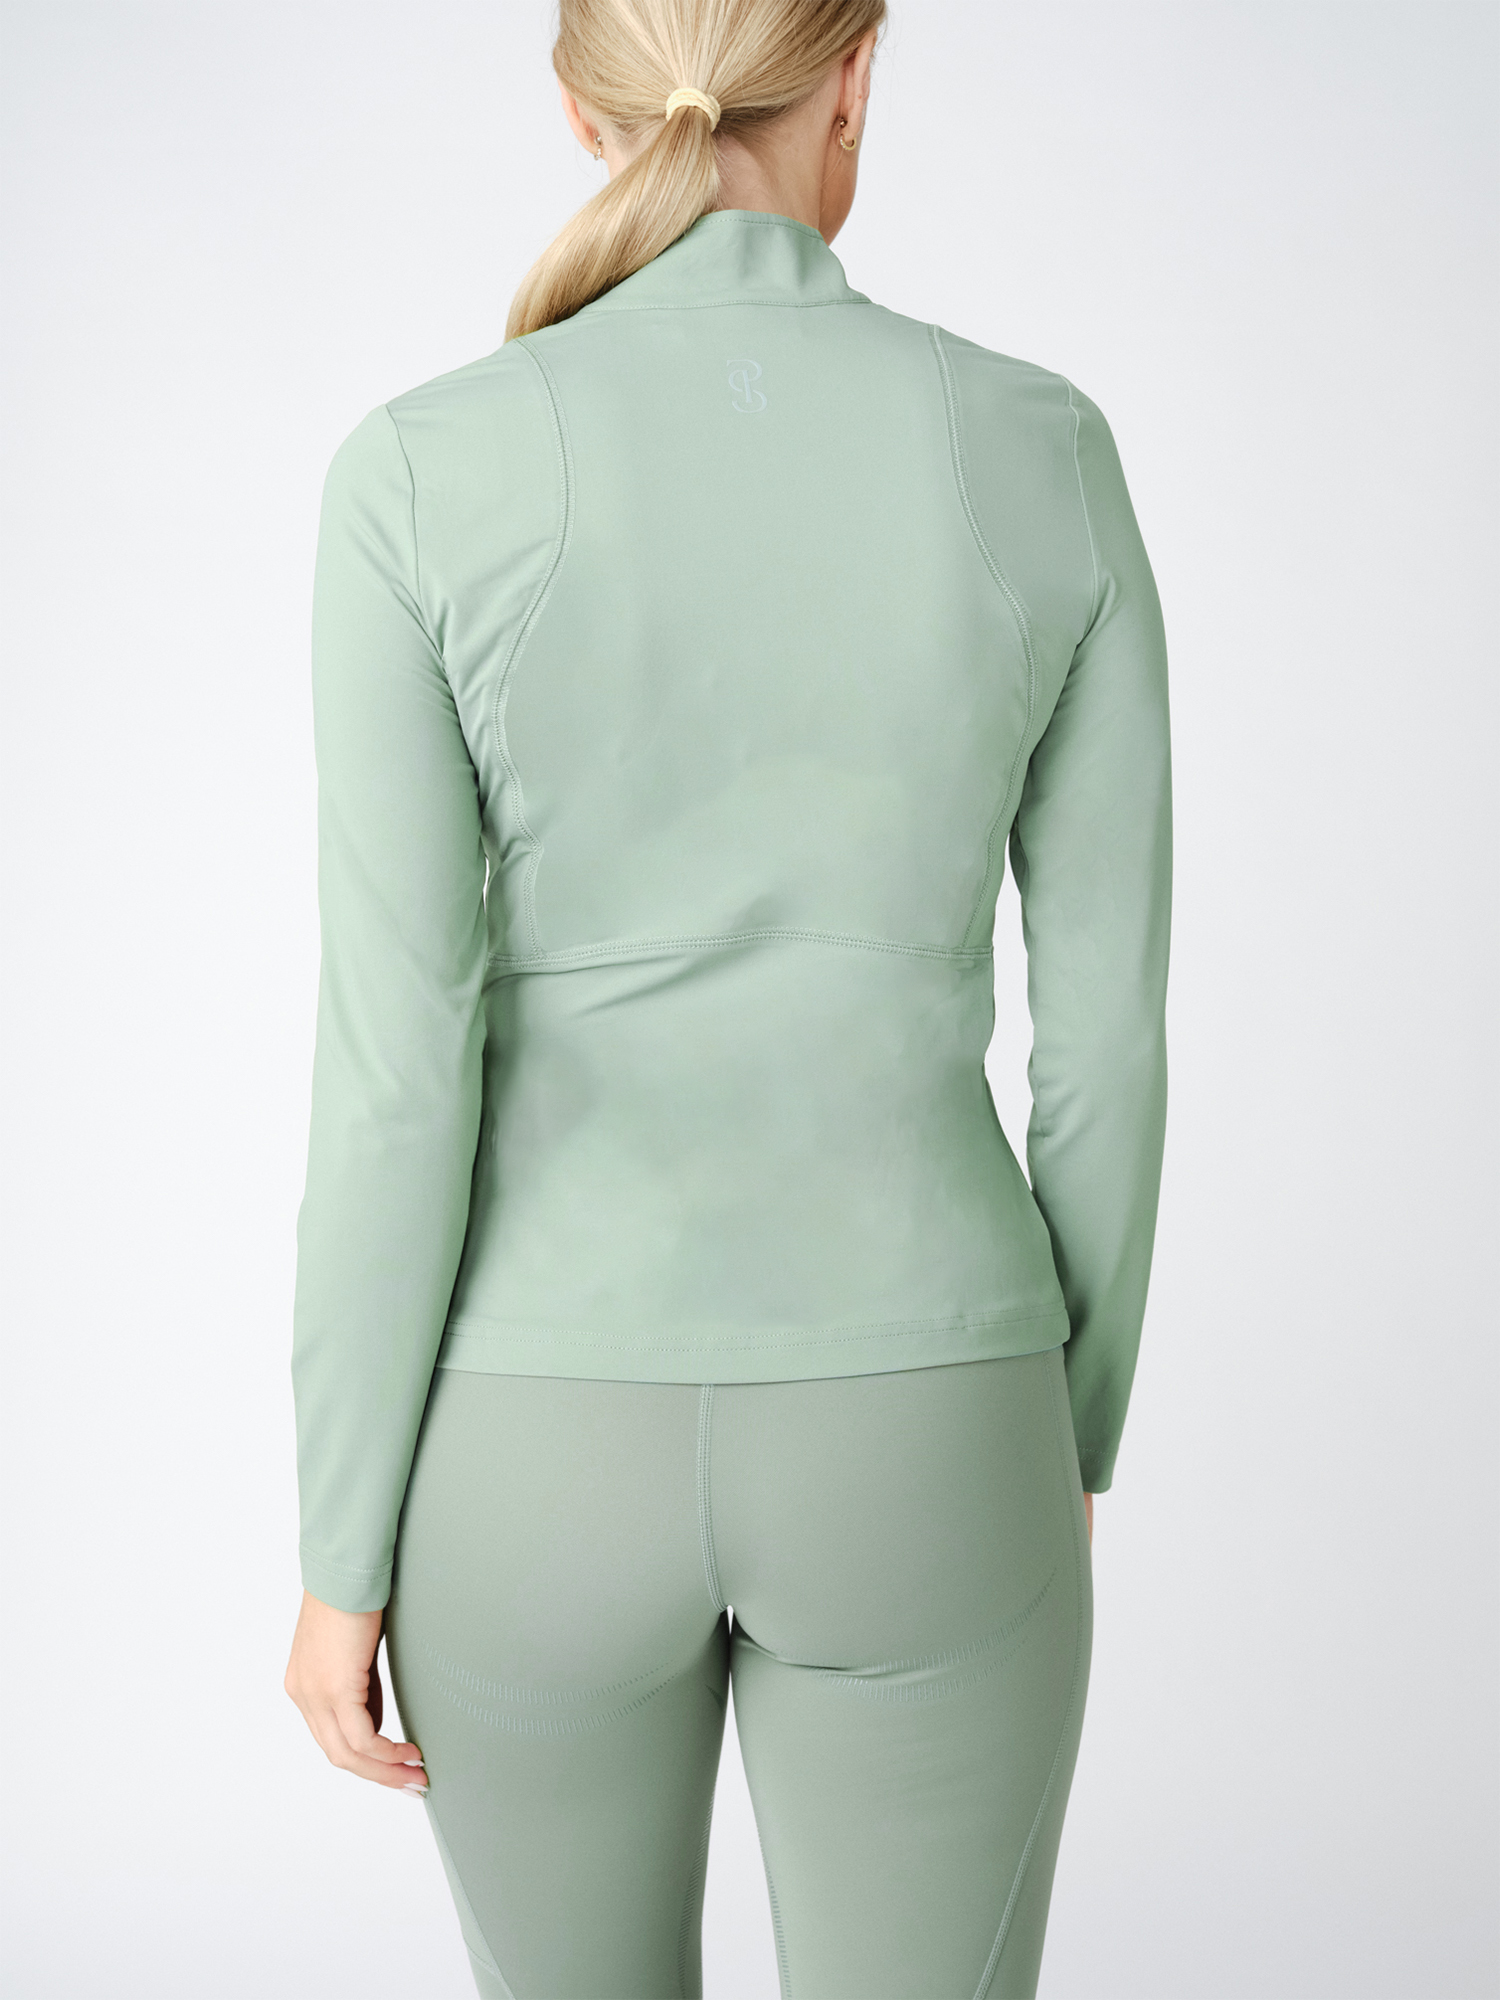 PS of Sweden Adele Base Layer